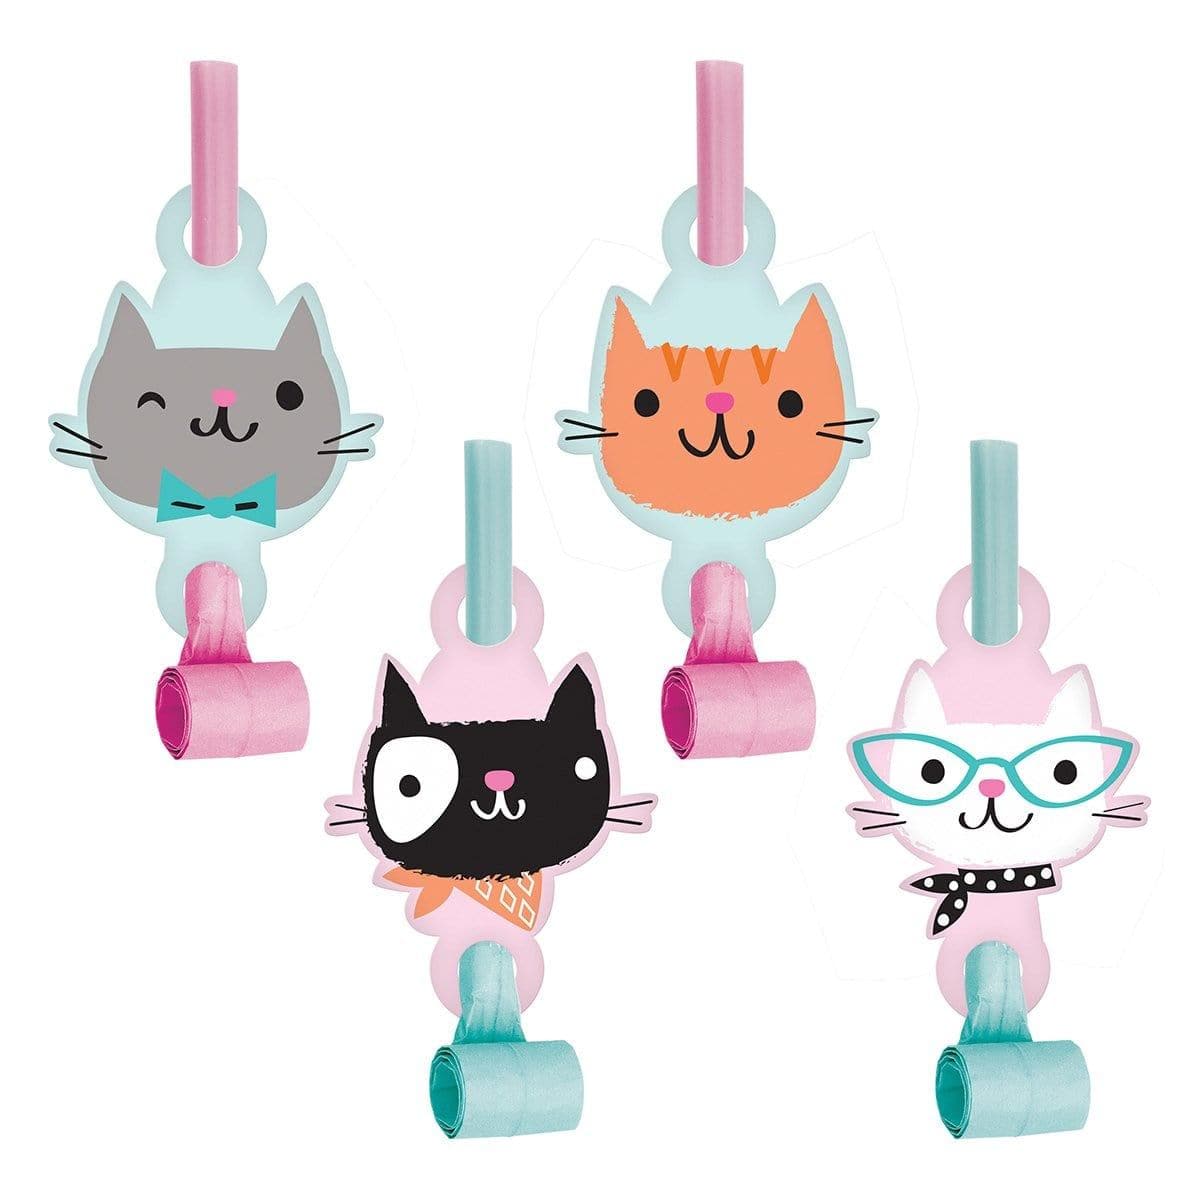 Buy Kids Birthday Purr-fect Party blowouts, 8 per package sold at Party Expert